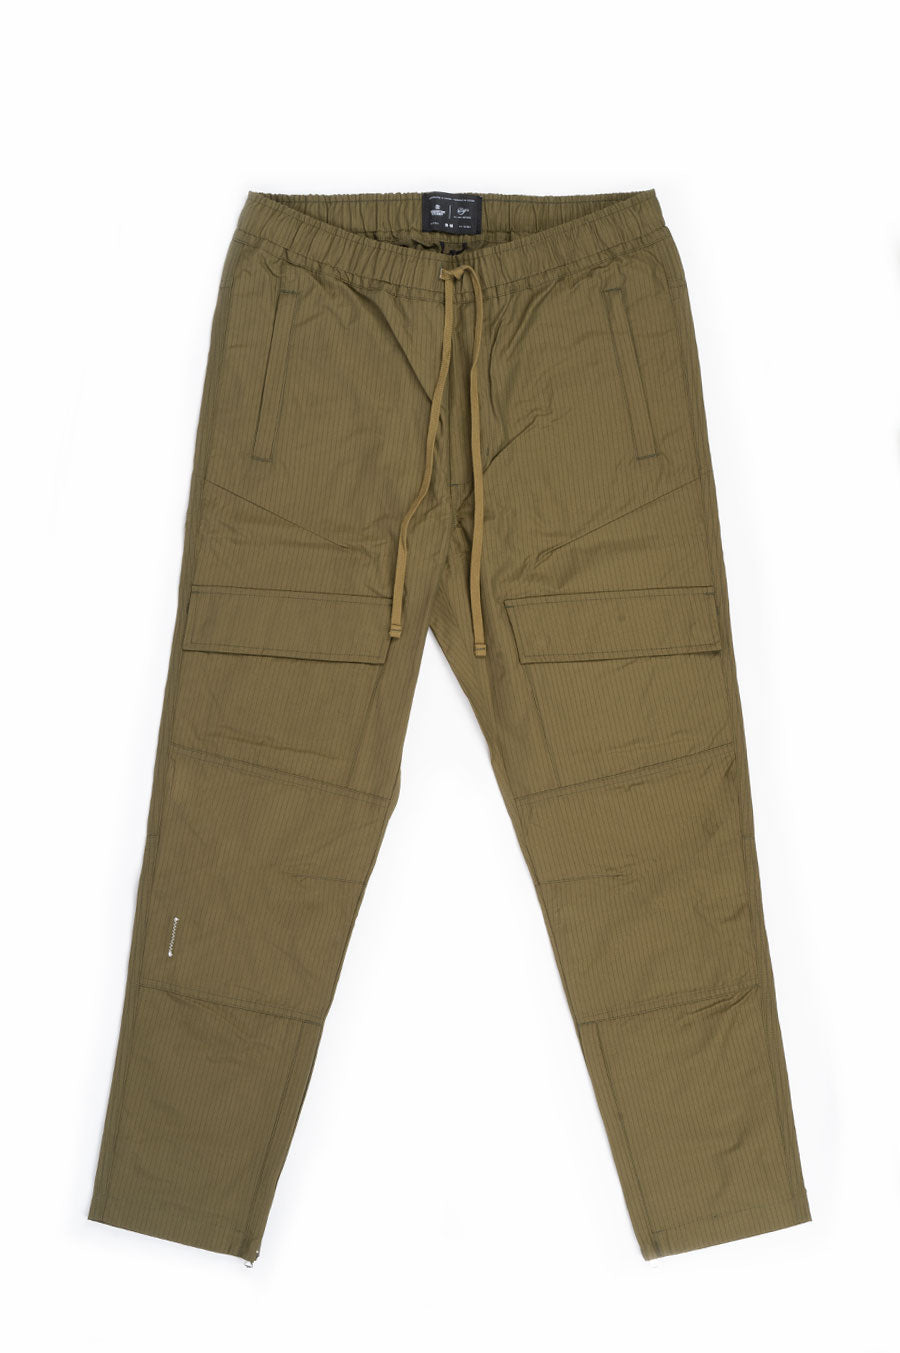 – RIPSTOP MOSS CHAMP CARGO S04 REIGNING PANT BLENDS